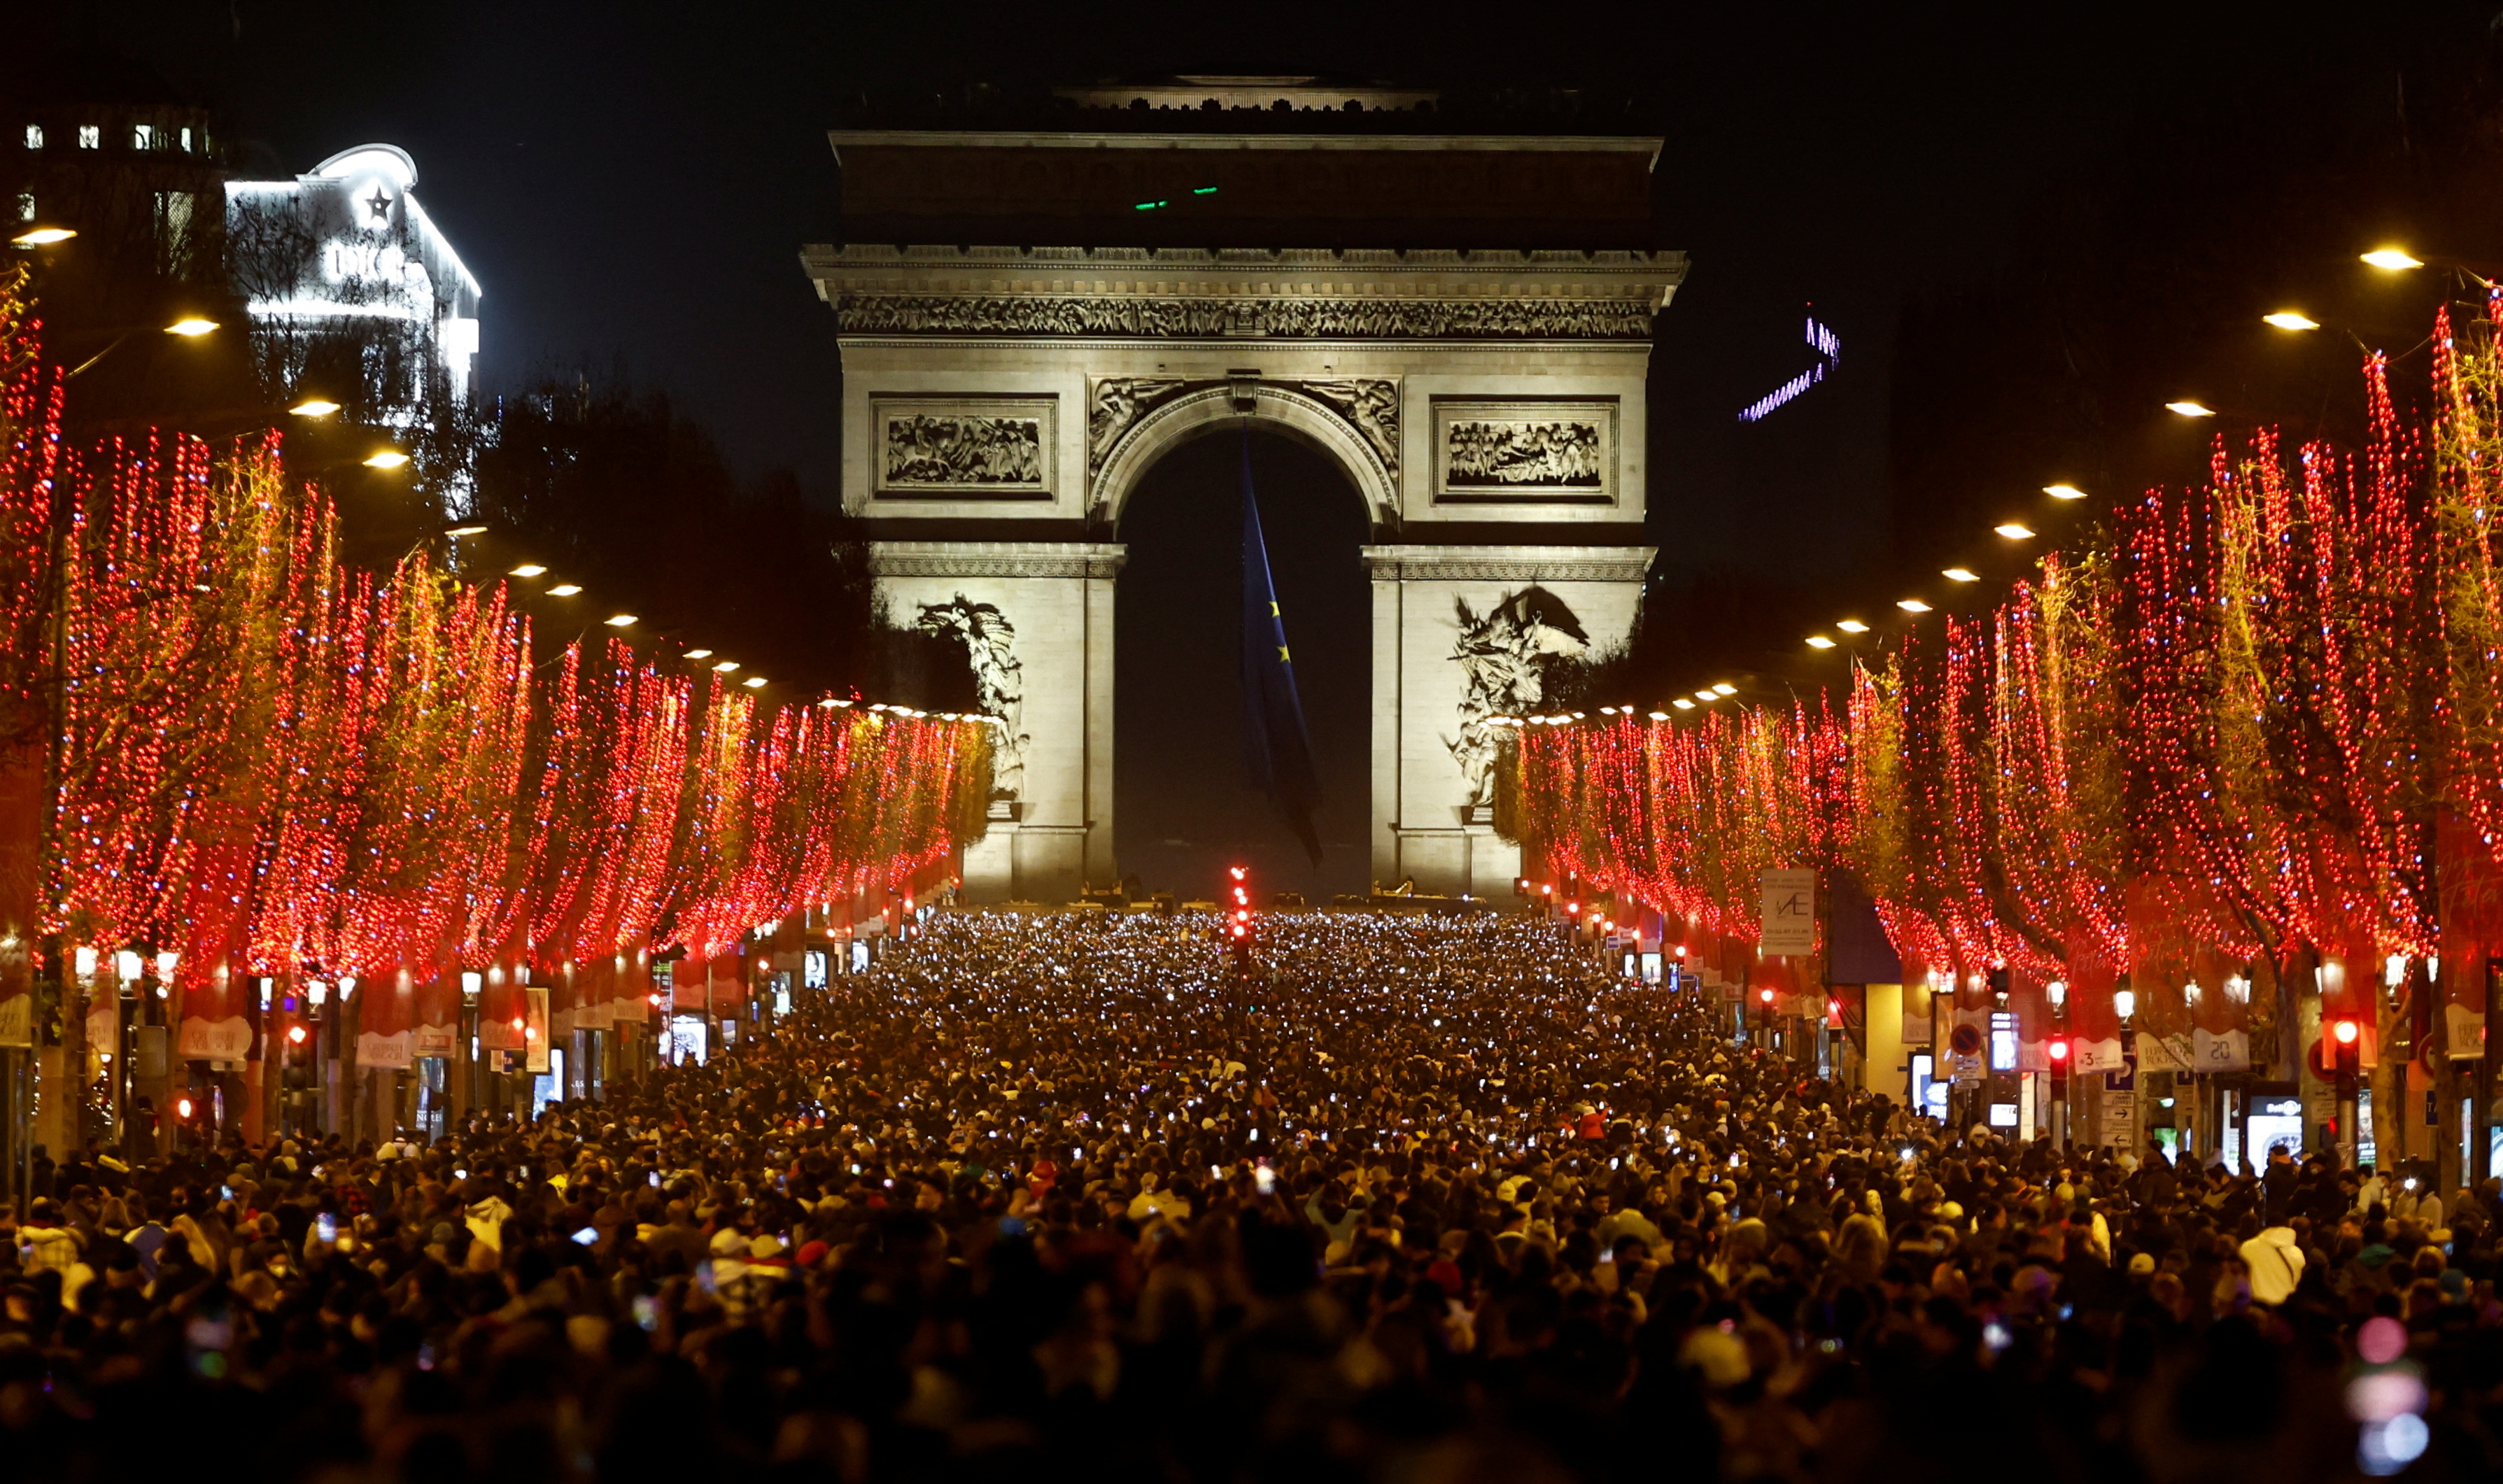 People attend New Year celebrations on the Champs-Elysees avenue as the traditional light show and fireworks have been cancelled due to the spread of the coronavirus disease (COVID-19) in Paris, France, December 31, 2021. REUTERS/Christian Hartmann